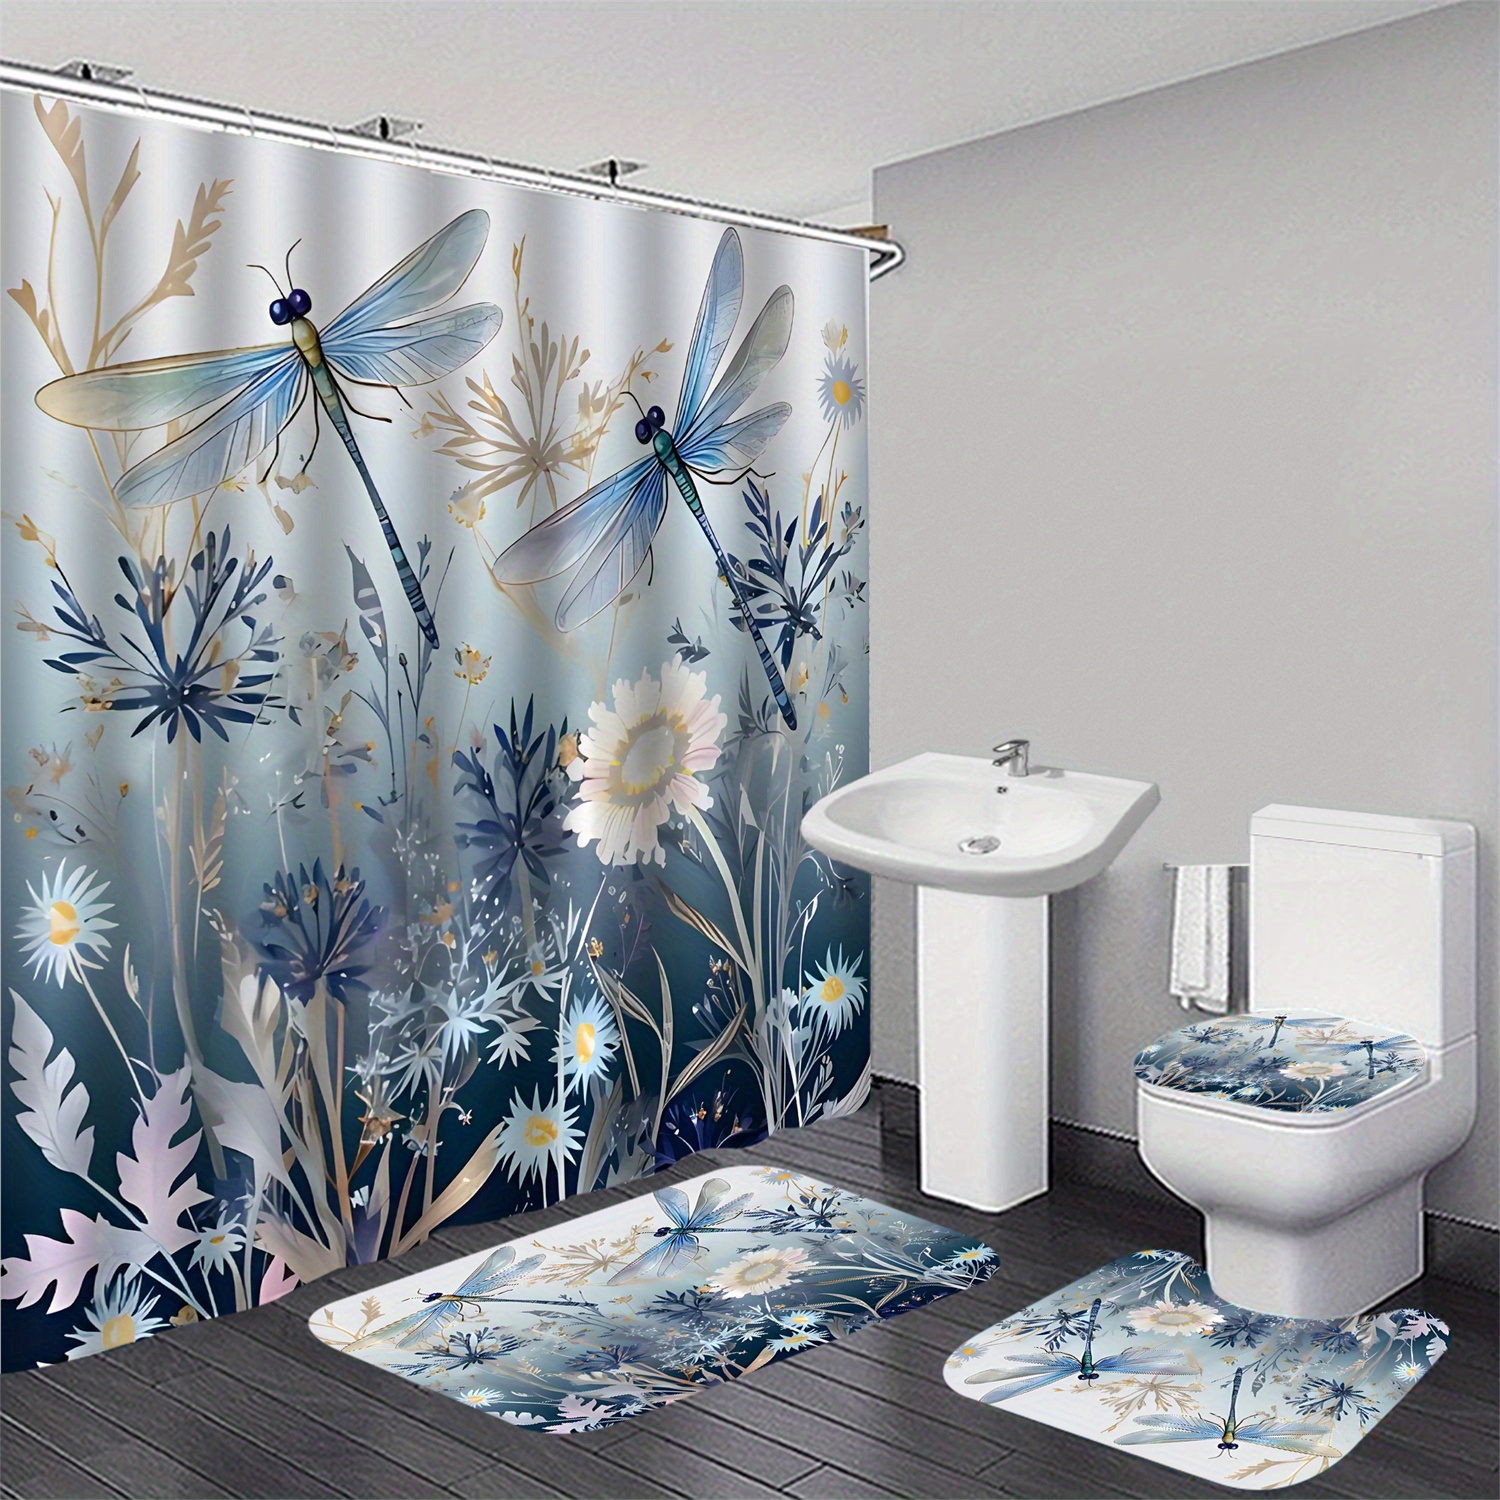 

4pcs Dragonfly & Daisy Pattern Shower Curtain Set, Waterproof Shower Curtain With Hooks, Non-slip Bath Rug, U-shape Mat, Toilet Lid Cover Pad, Home Decor, Bathroom Accessories